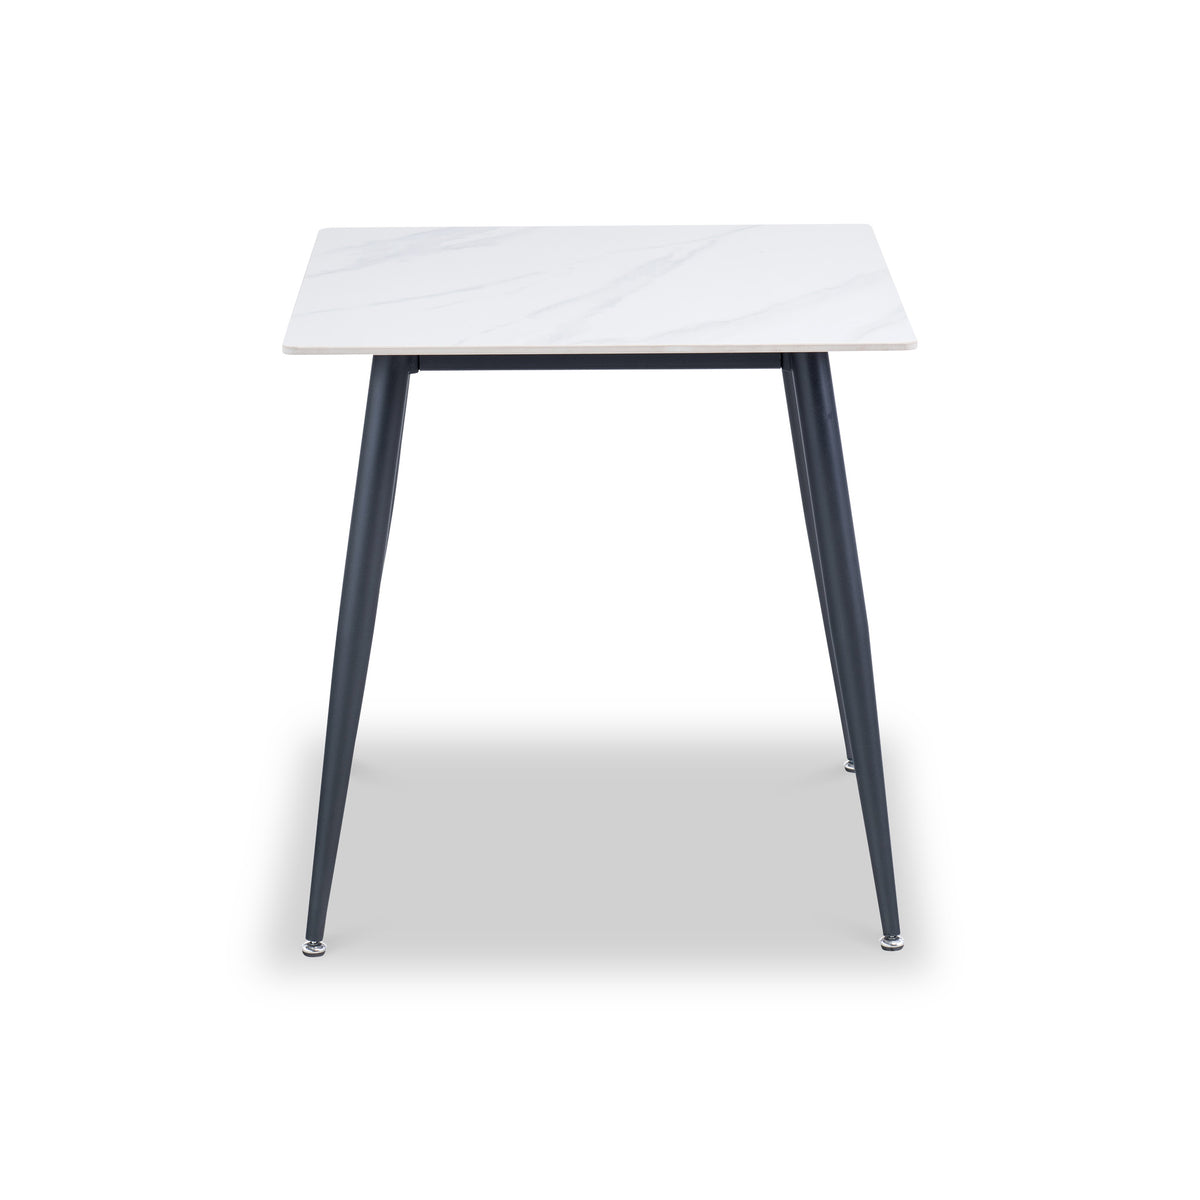 Avril White Sintered Stone 75cm Square Dining Table from Roseland Furniture